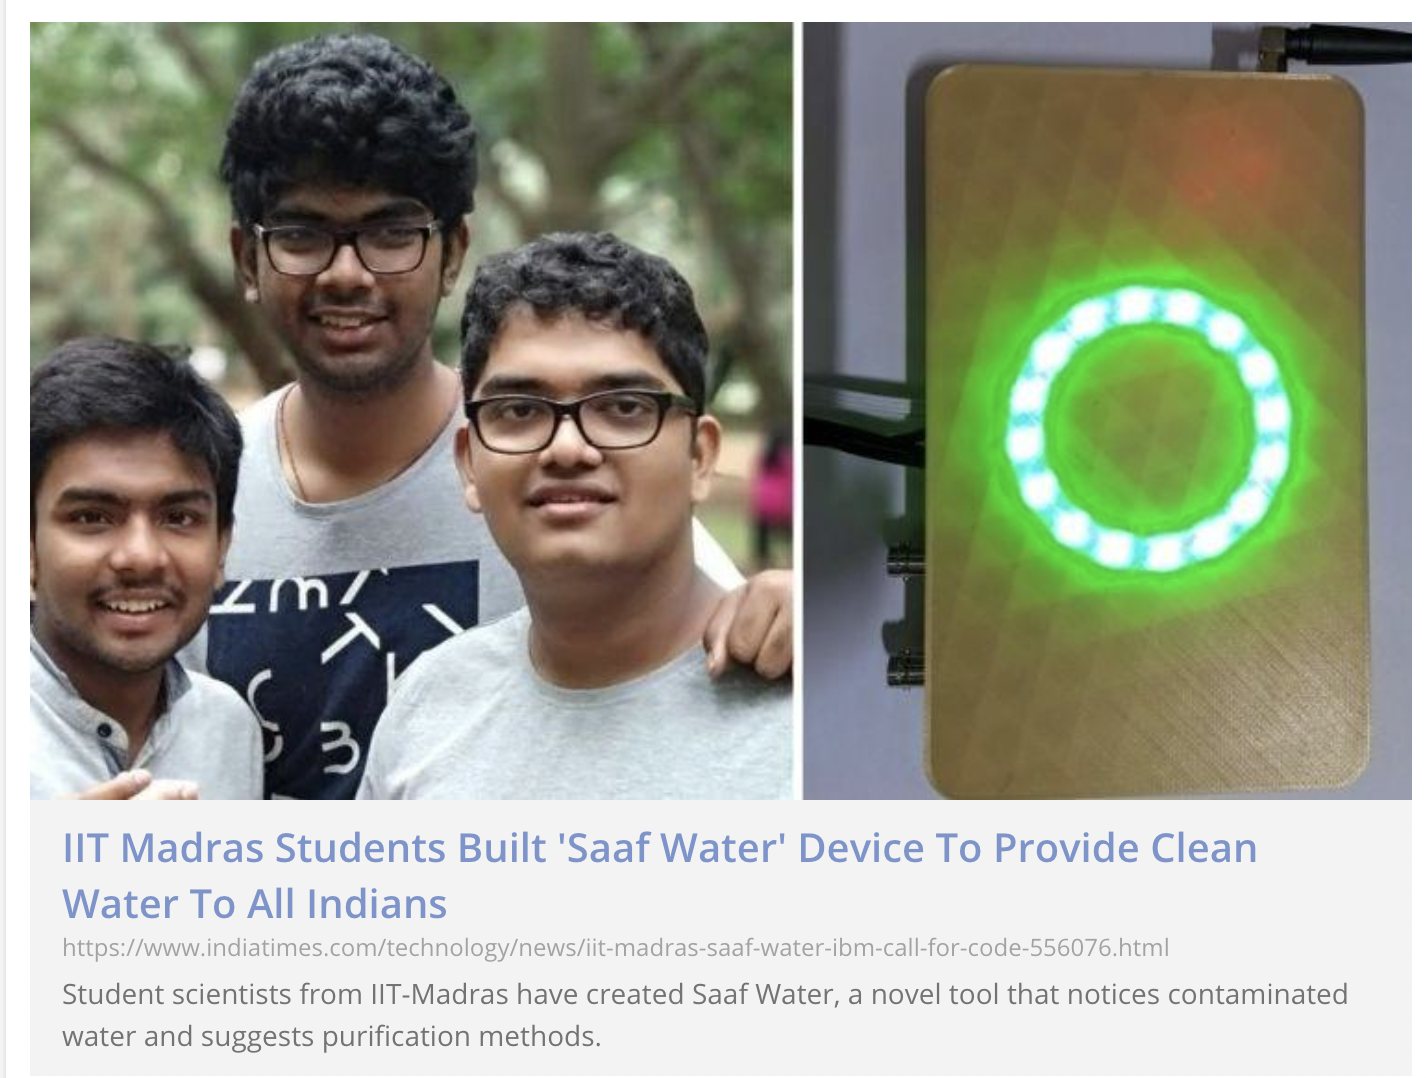 IIT Madras Students Built 'Saaf Water' Device To Provide Clean Water To All Indians inspired by their Mom's illnesshttps://thewaternetwork.com/_...